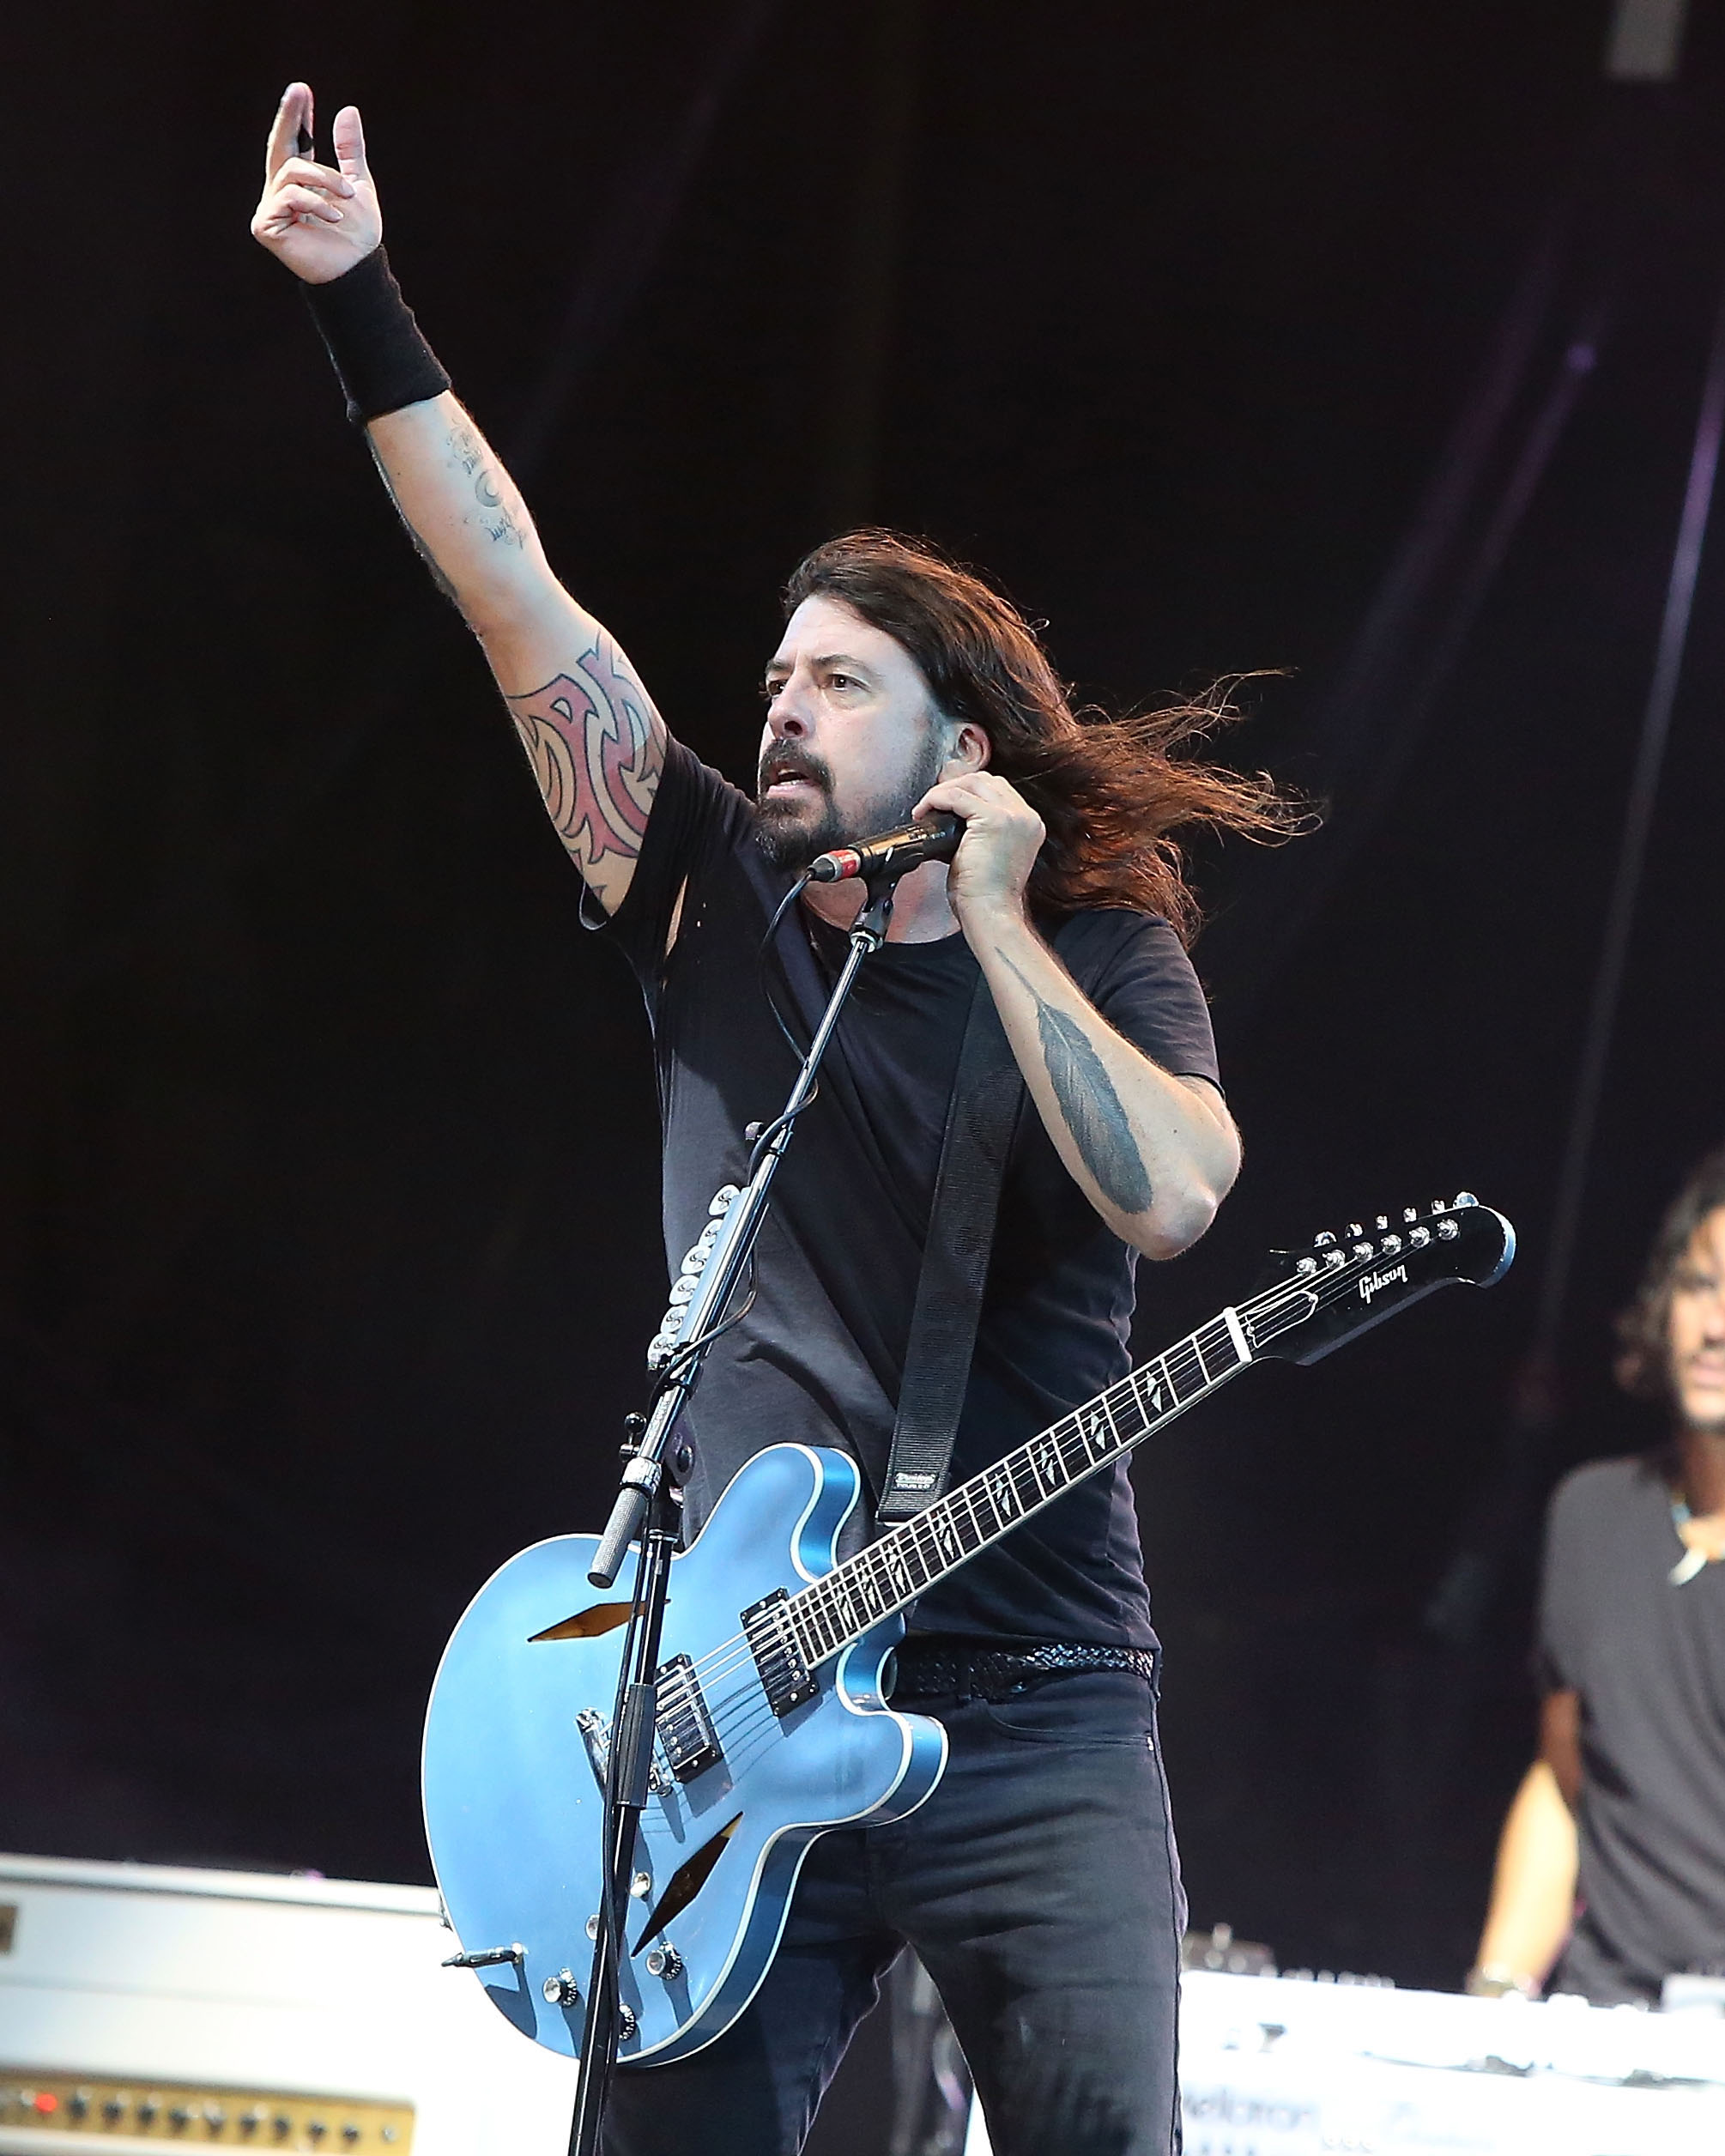 Dave Grohl of Foo Fighters performs at Hangout Music Festival on May 15, 2015 in Gulf Shores, Alabama. (Taylor Hill—Getty Images)